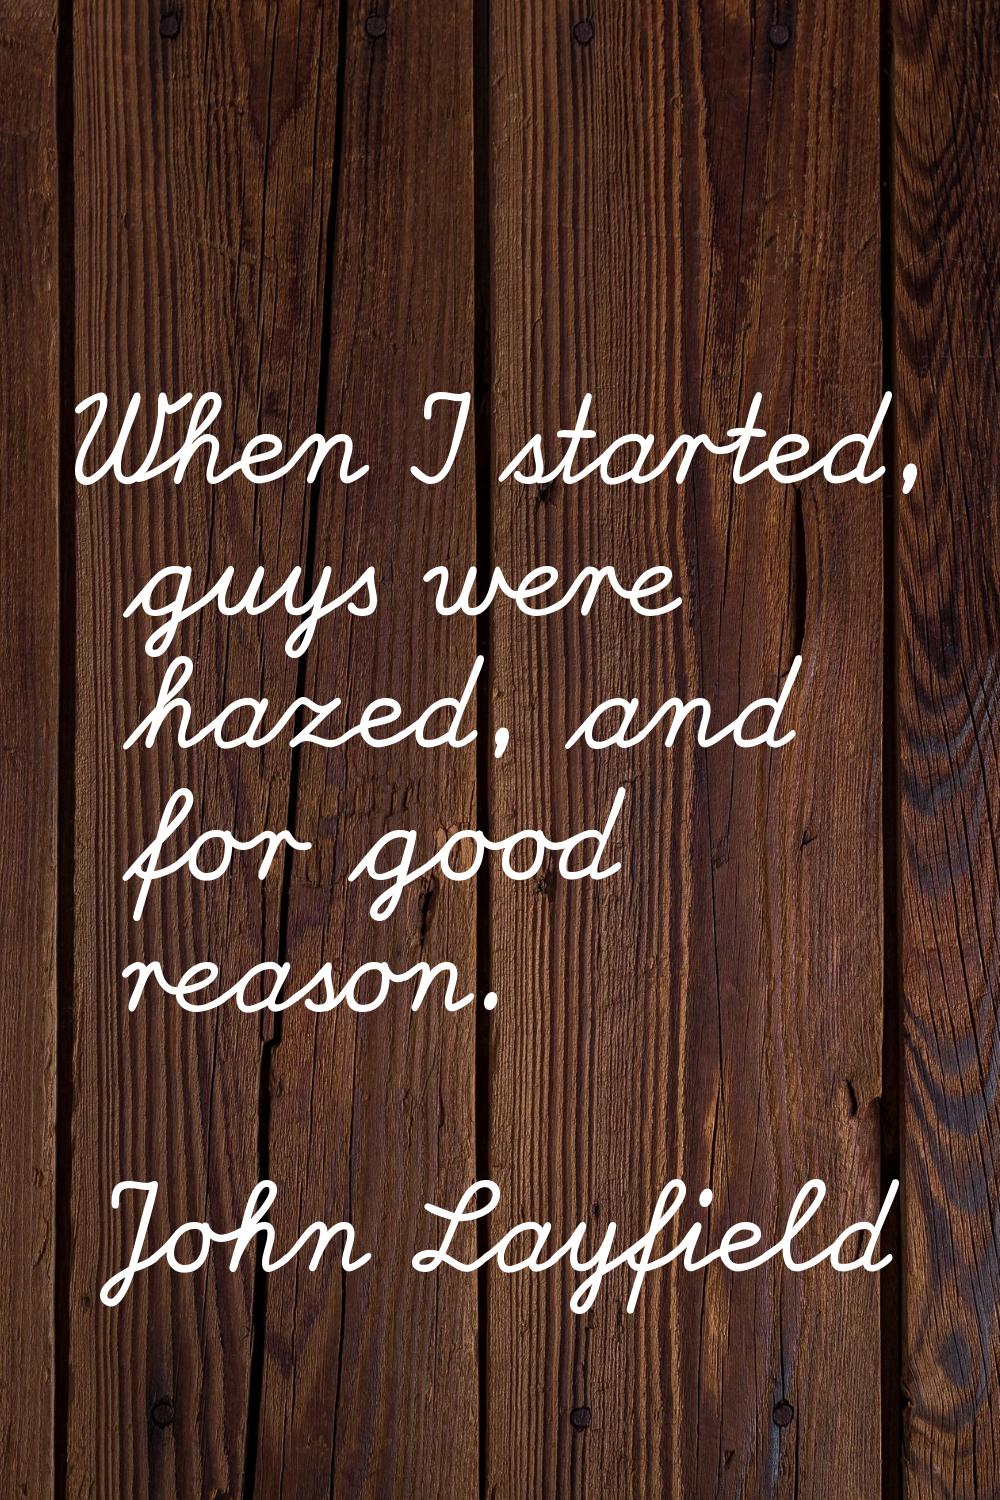 When I started, guys were hazed, and for good reason.